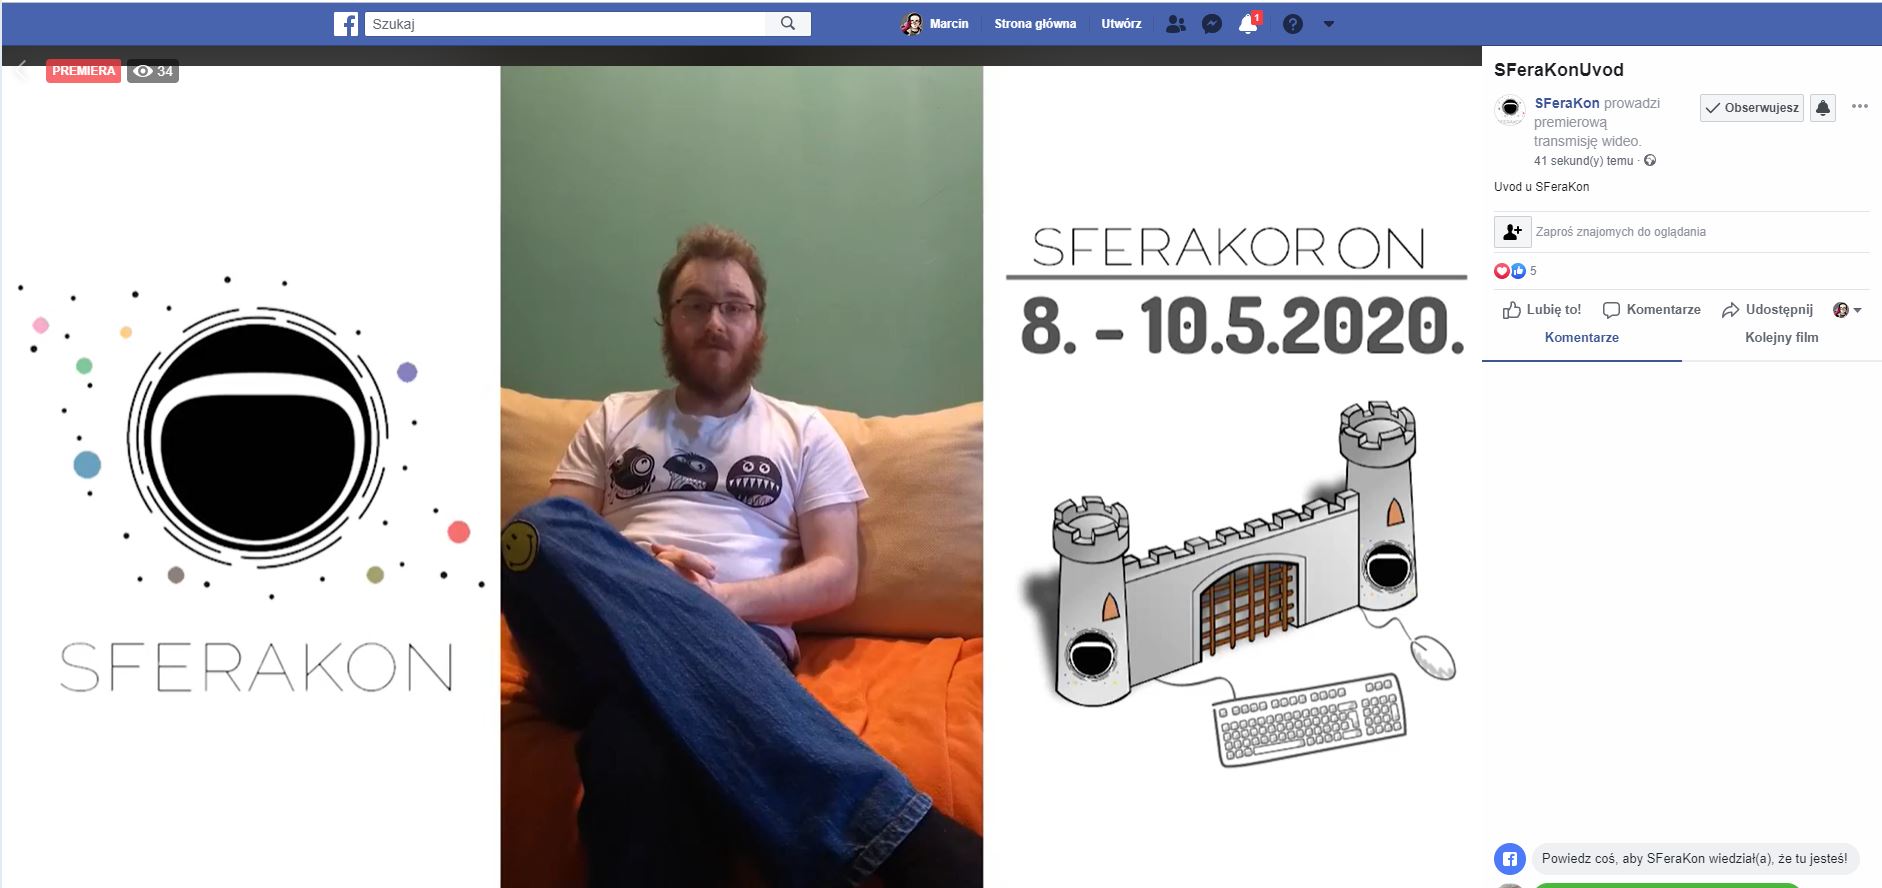 Screenshot from facebook live stream. On the left there is astronaut's helmet and SFERAKON name, in the middle there is a person sitting on the couch. To the right there is convention name and date and below picture of city wall with keyboard connected to it. Lastly there is facebook chat visible.